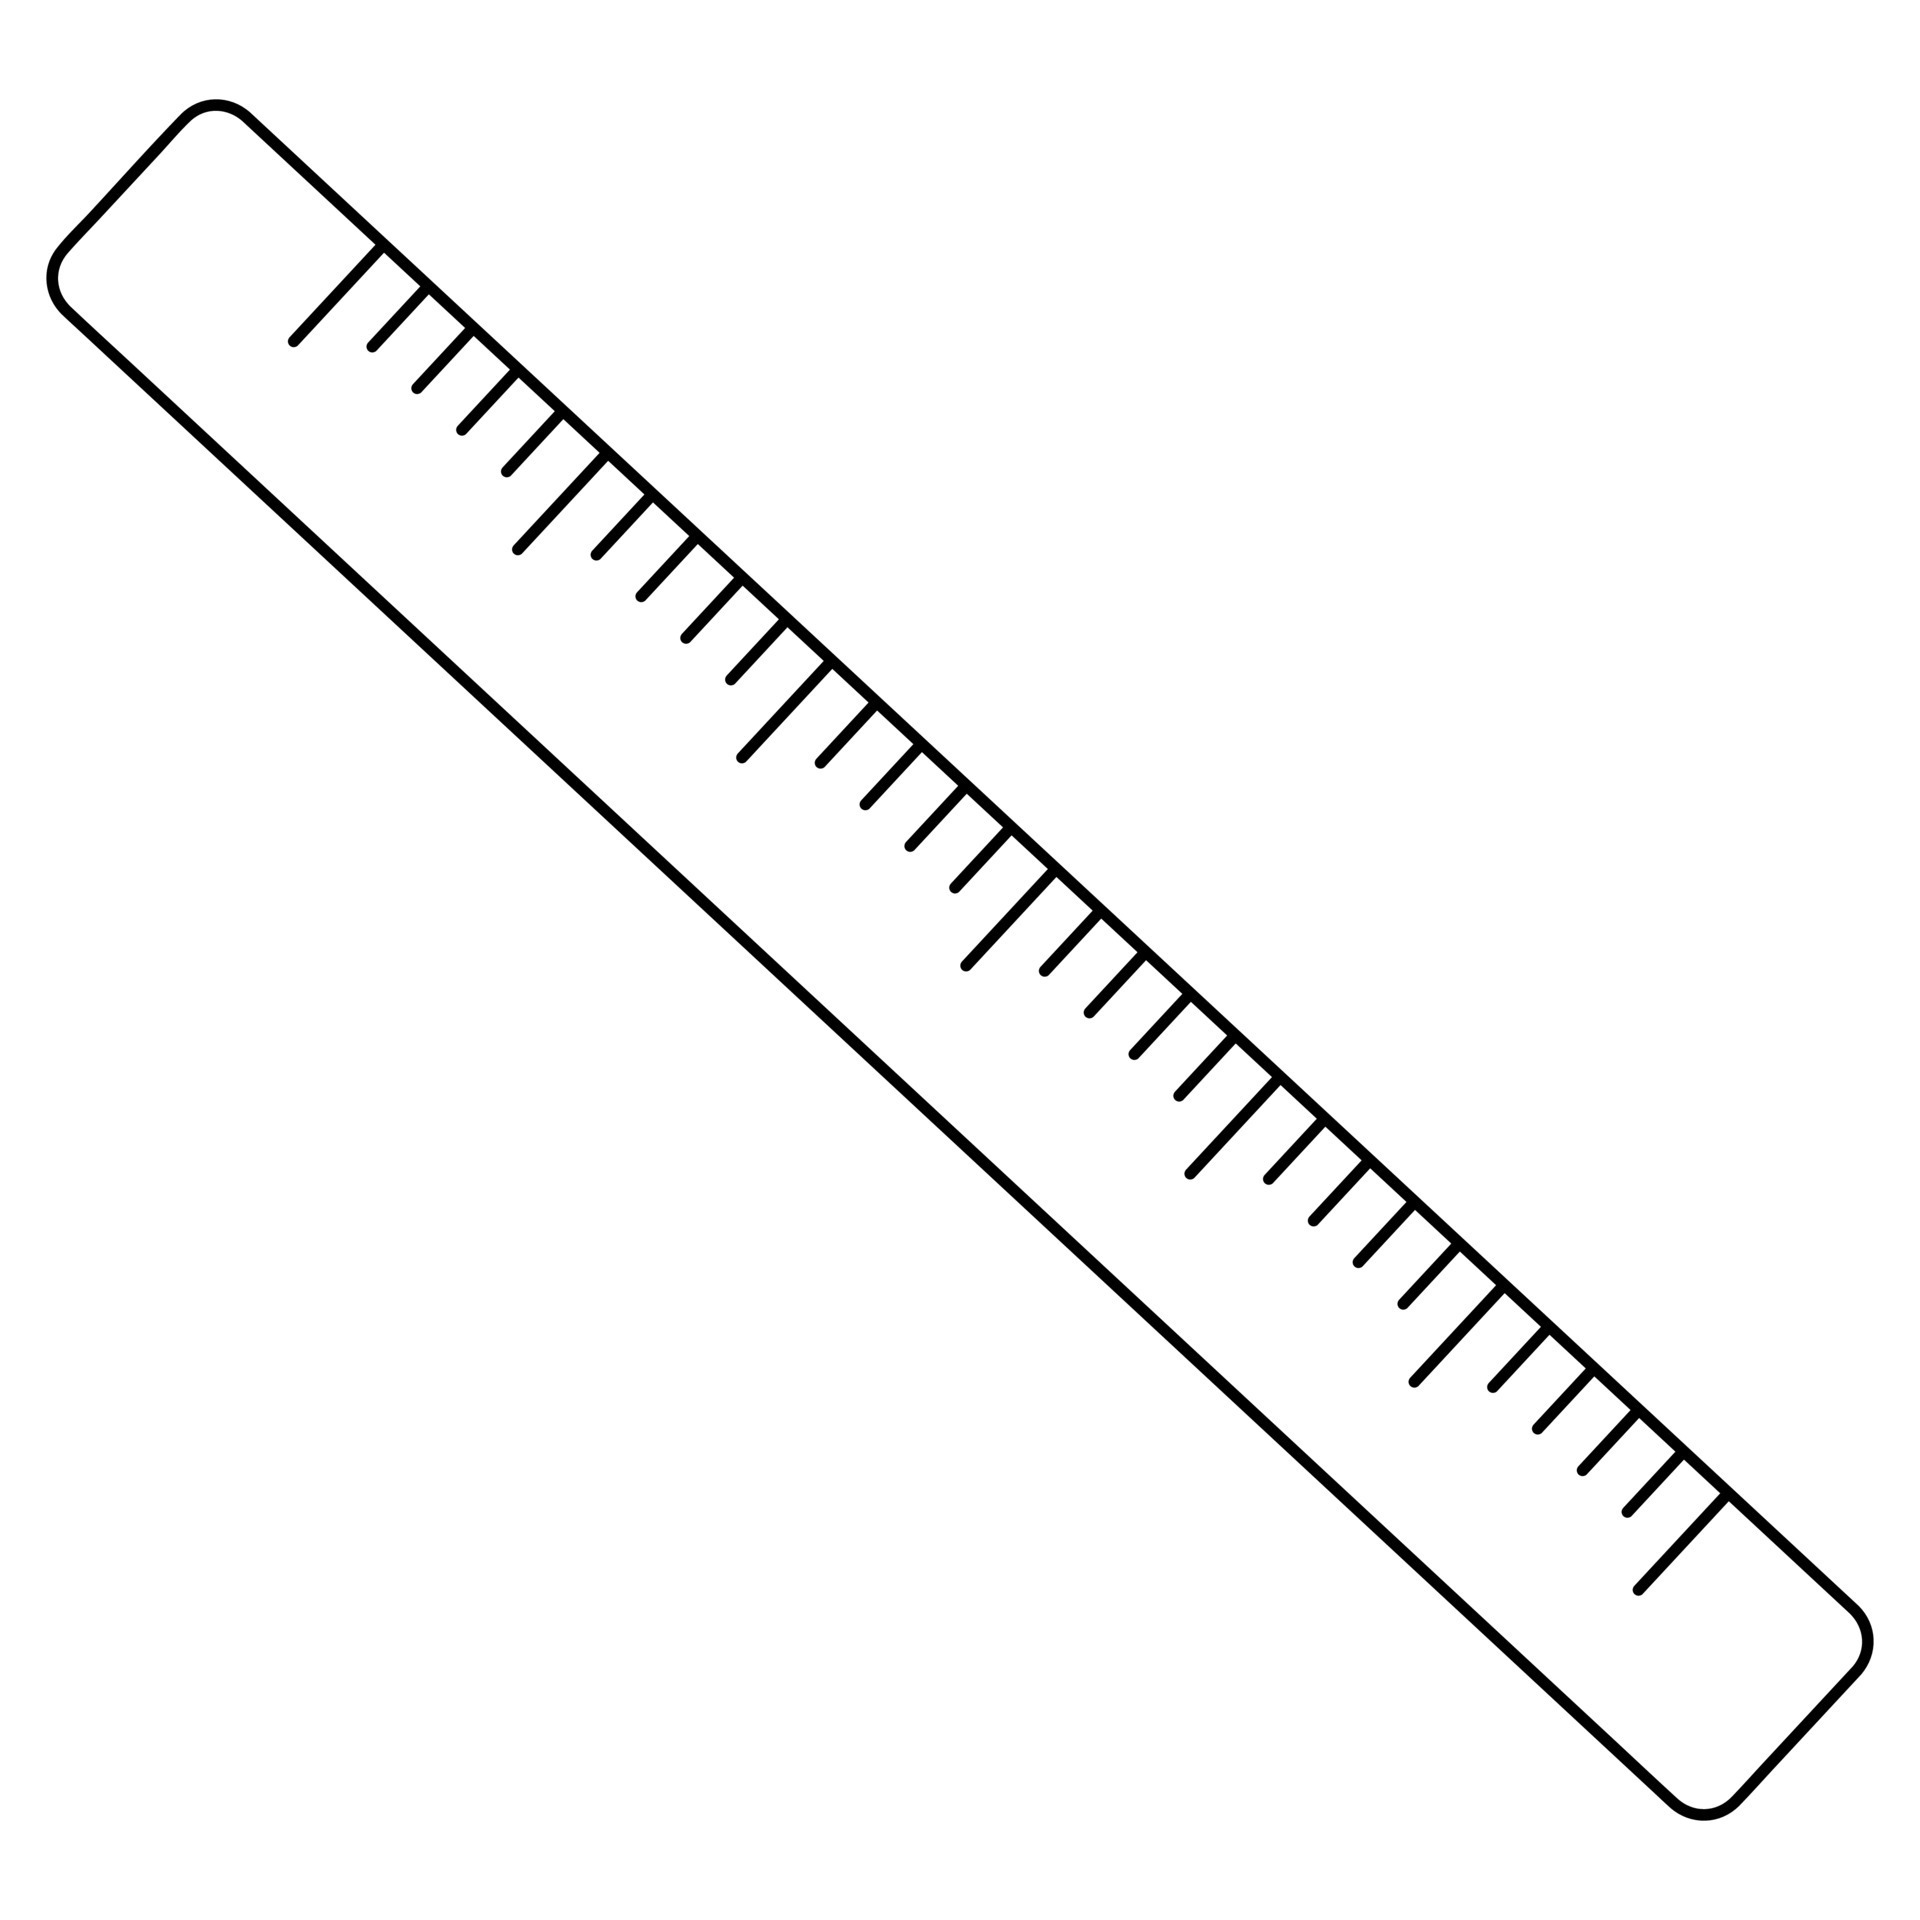 Ruler with measurement scale. Sketch. Tool for measuring distances